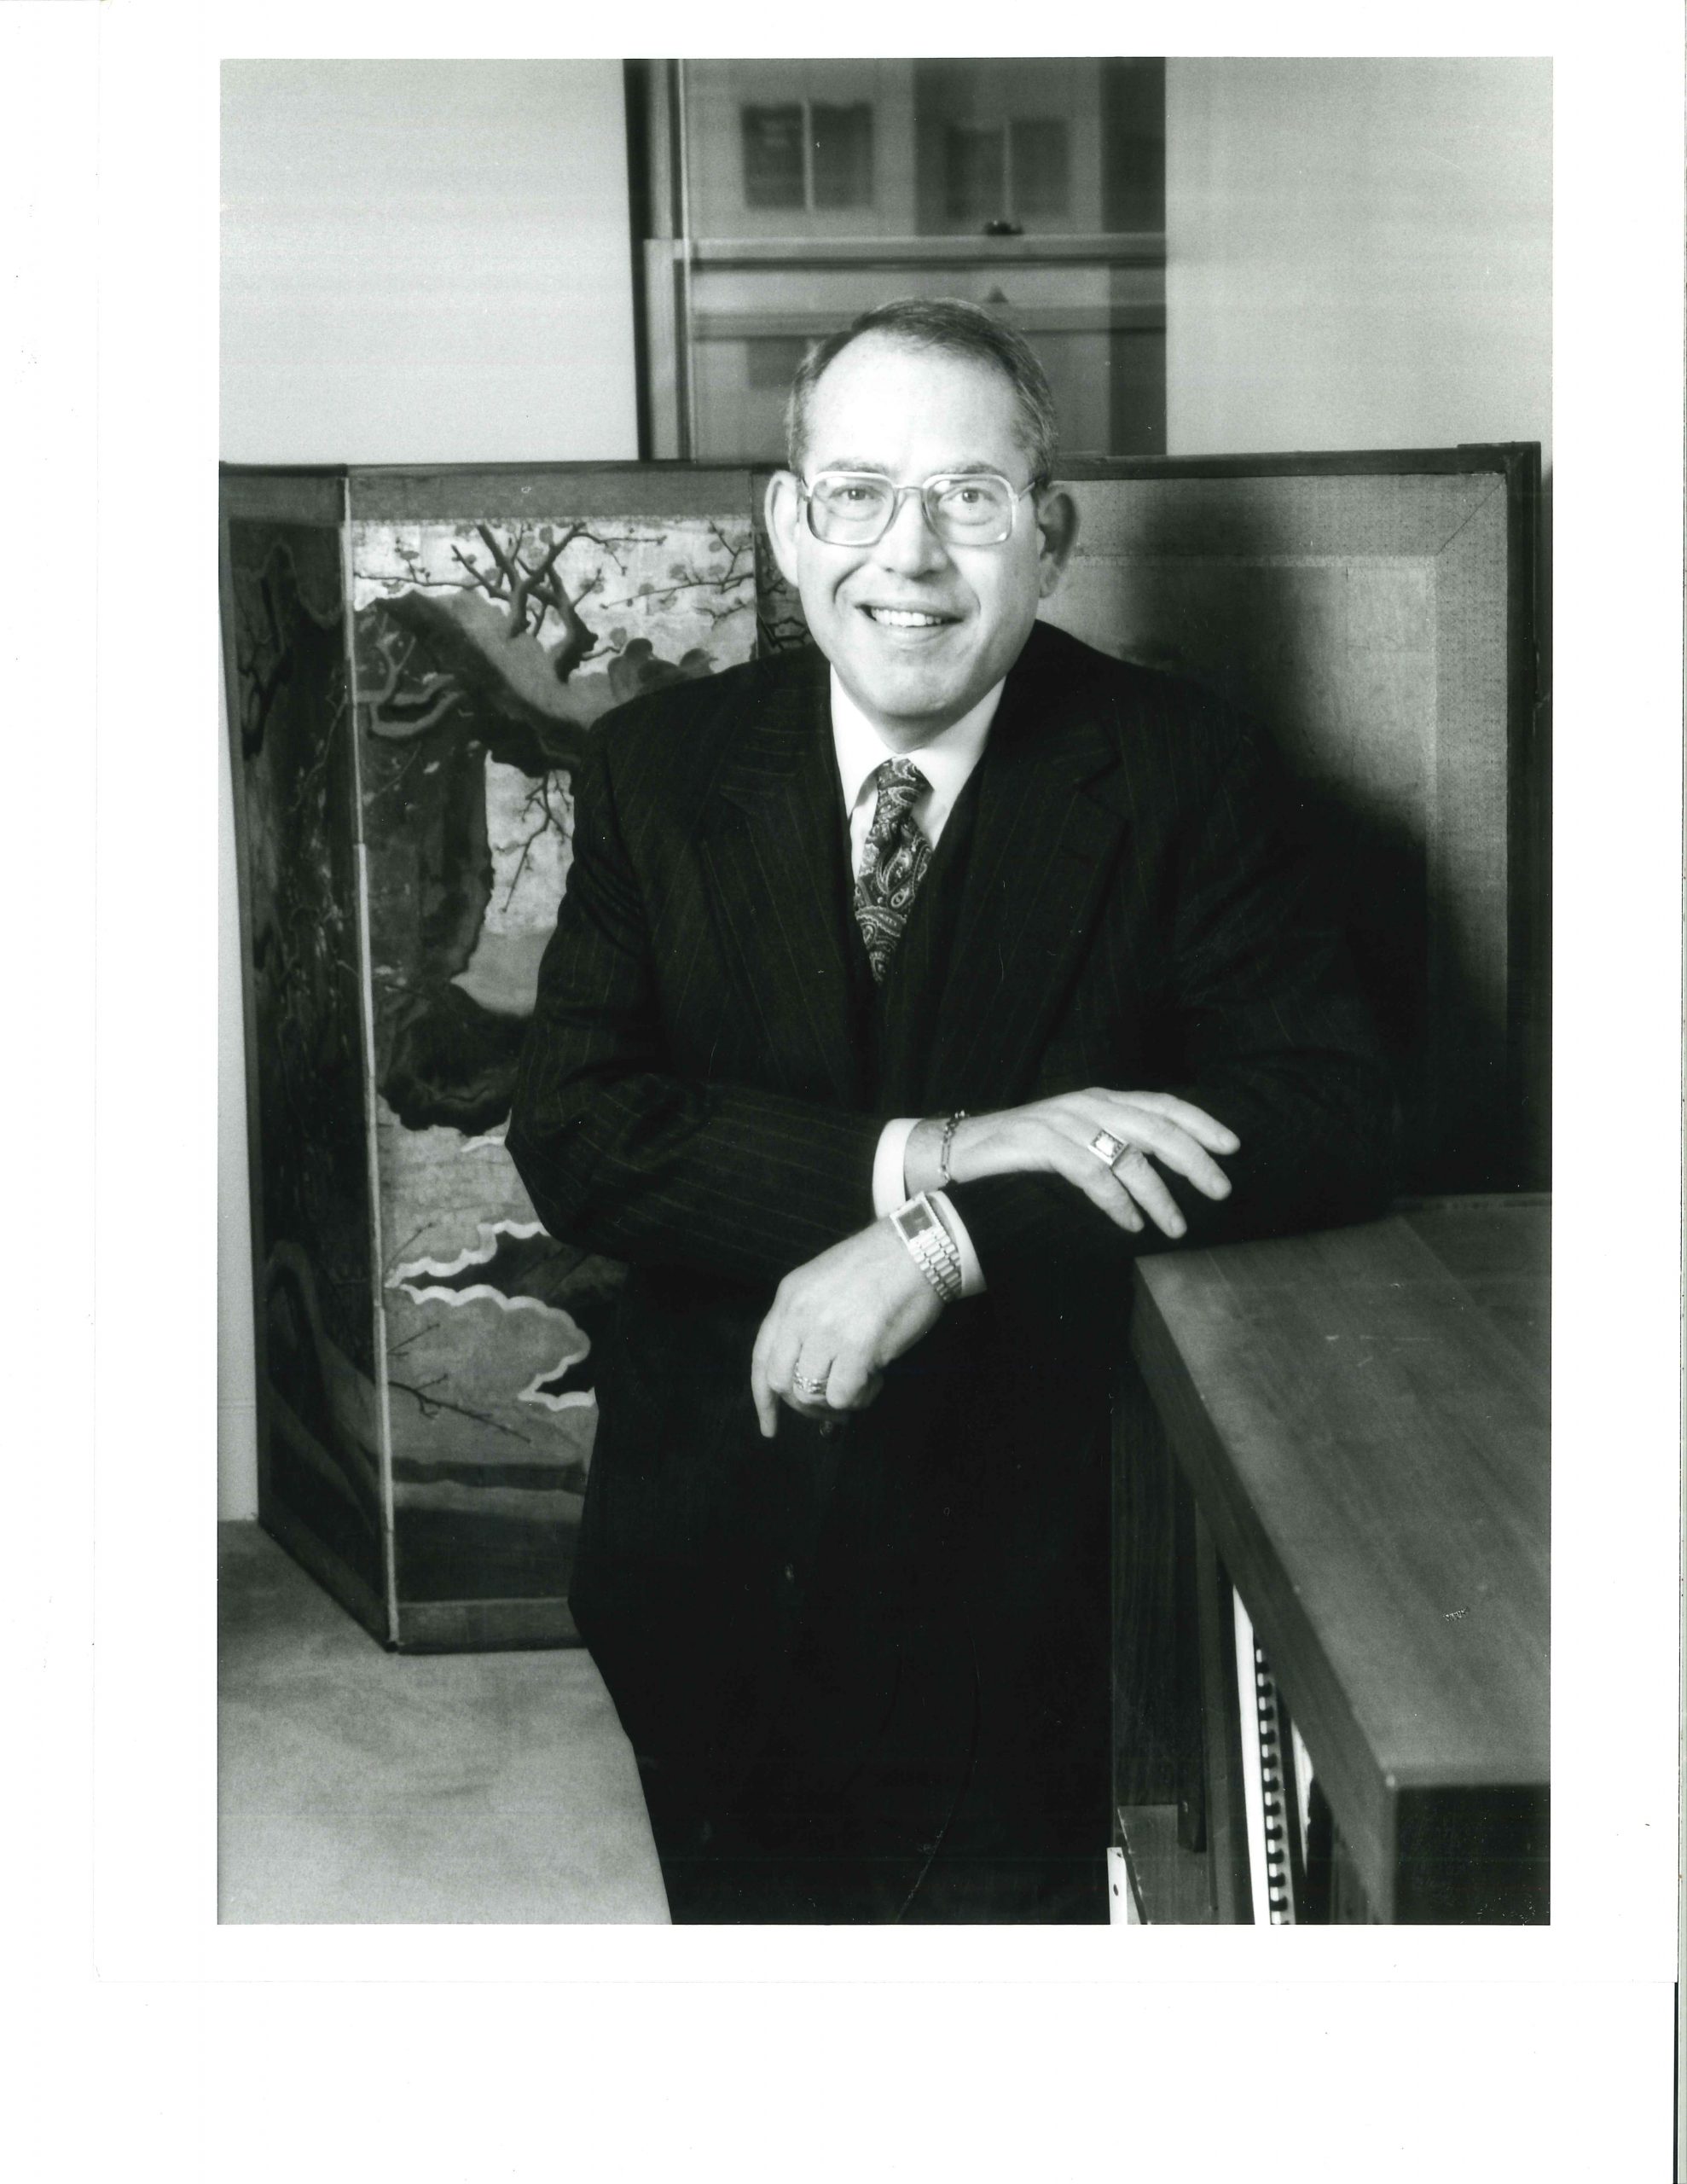 Douglas P. Holloway, in stripped suit with glasses, smiles at camera while standing in office.